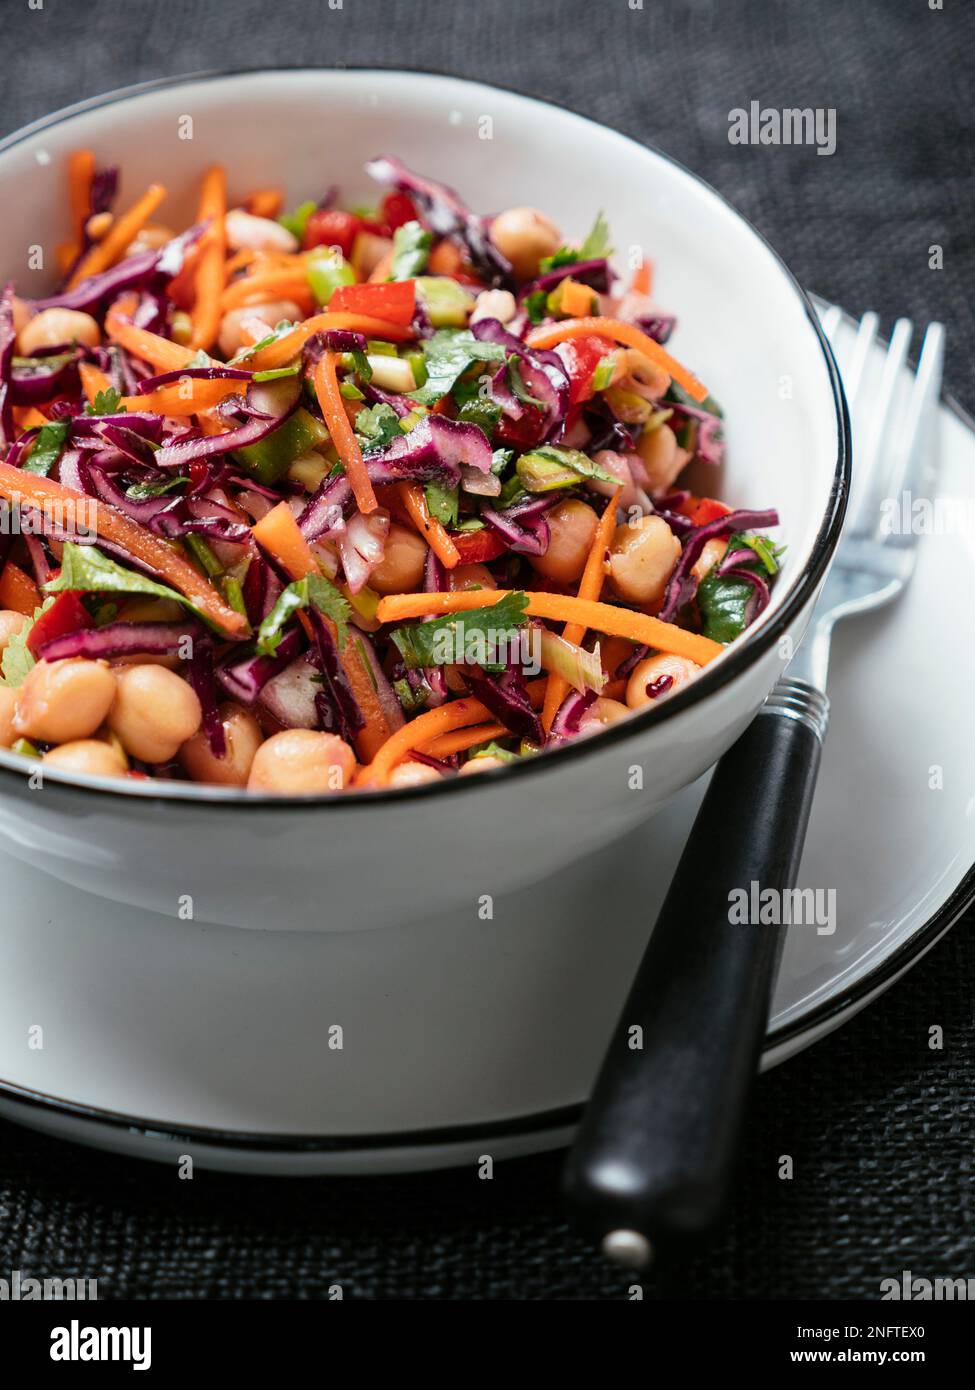 Home made chickpea slaw salad with bell peppers Stock Photo